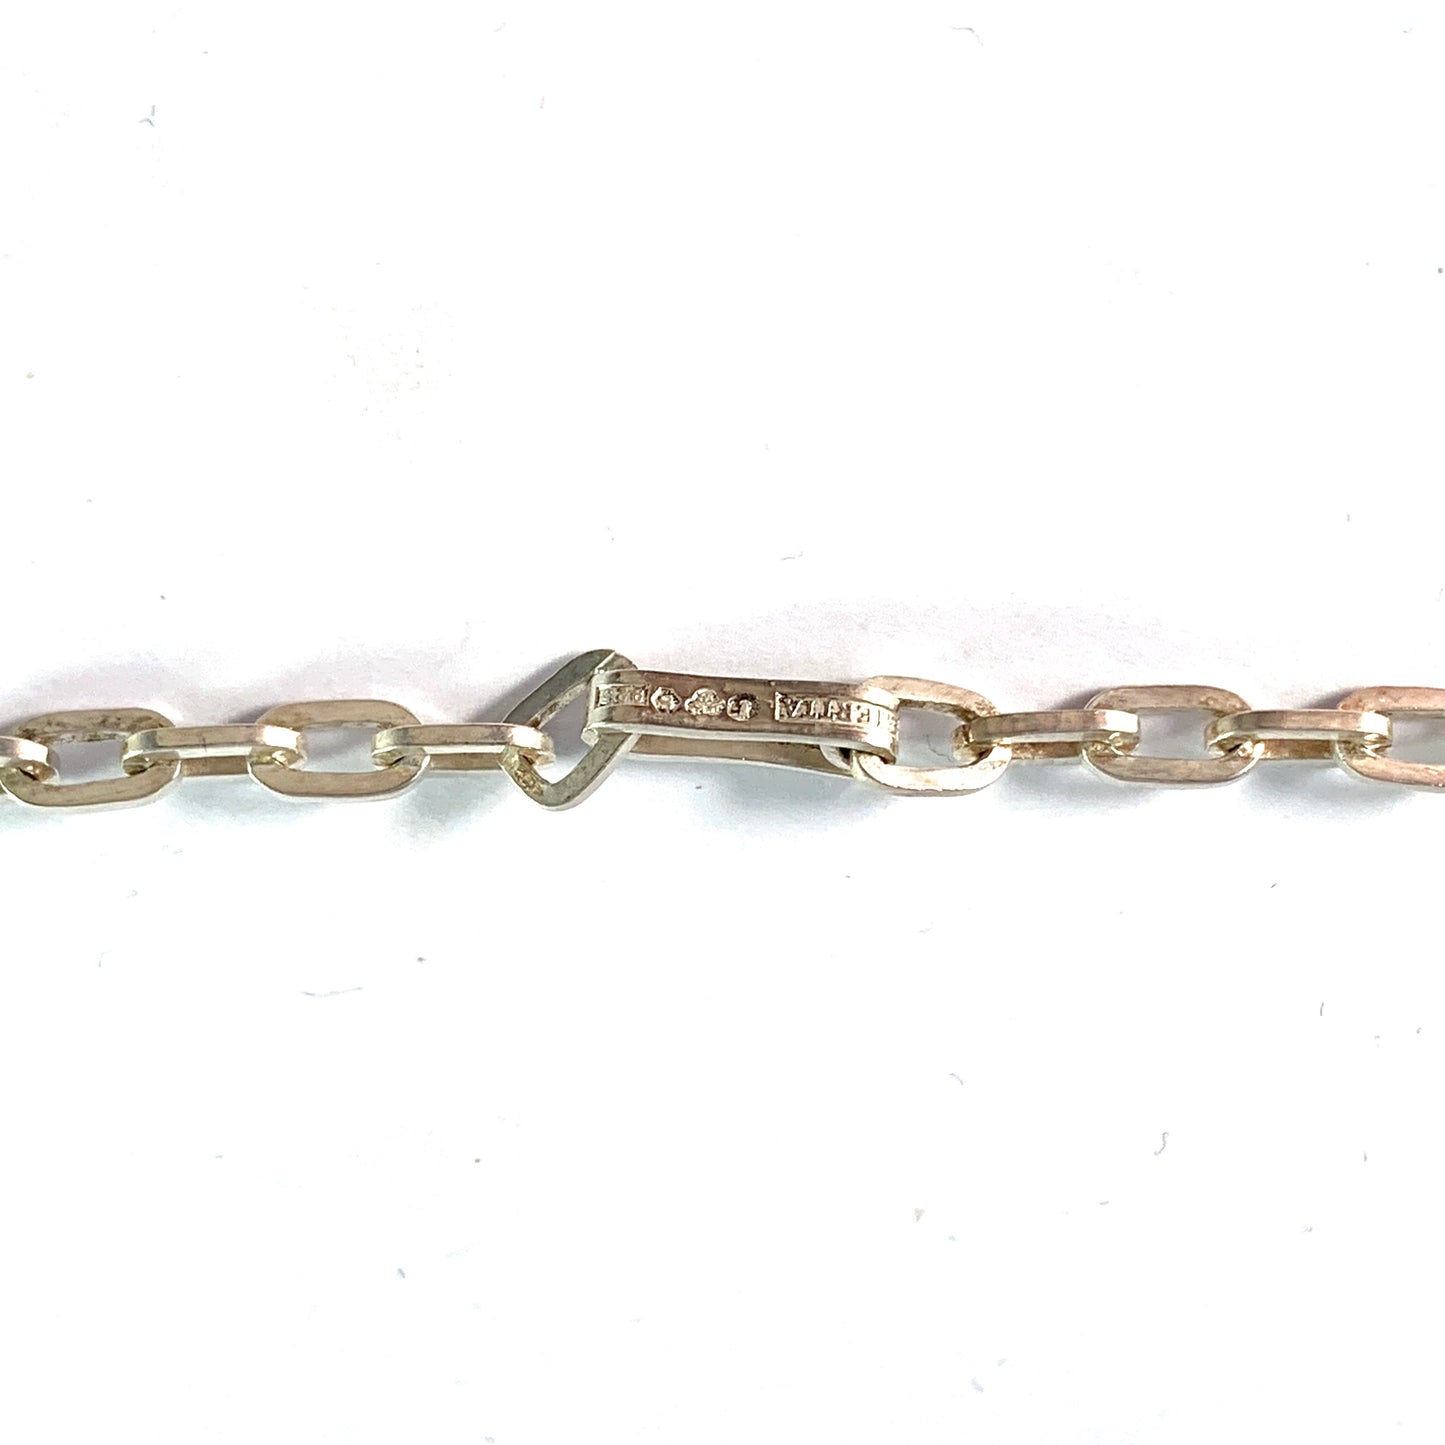 Claes E Giertta, Stockholm. Vintage Sterling Silver Chain Necklace. Signed